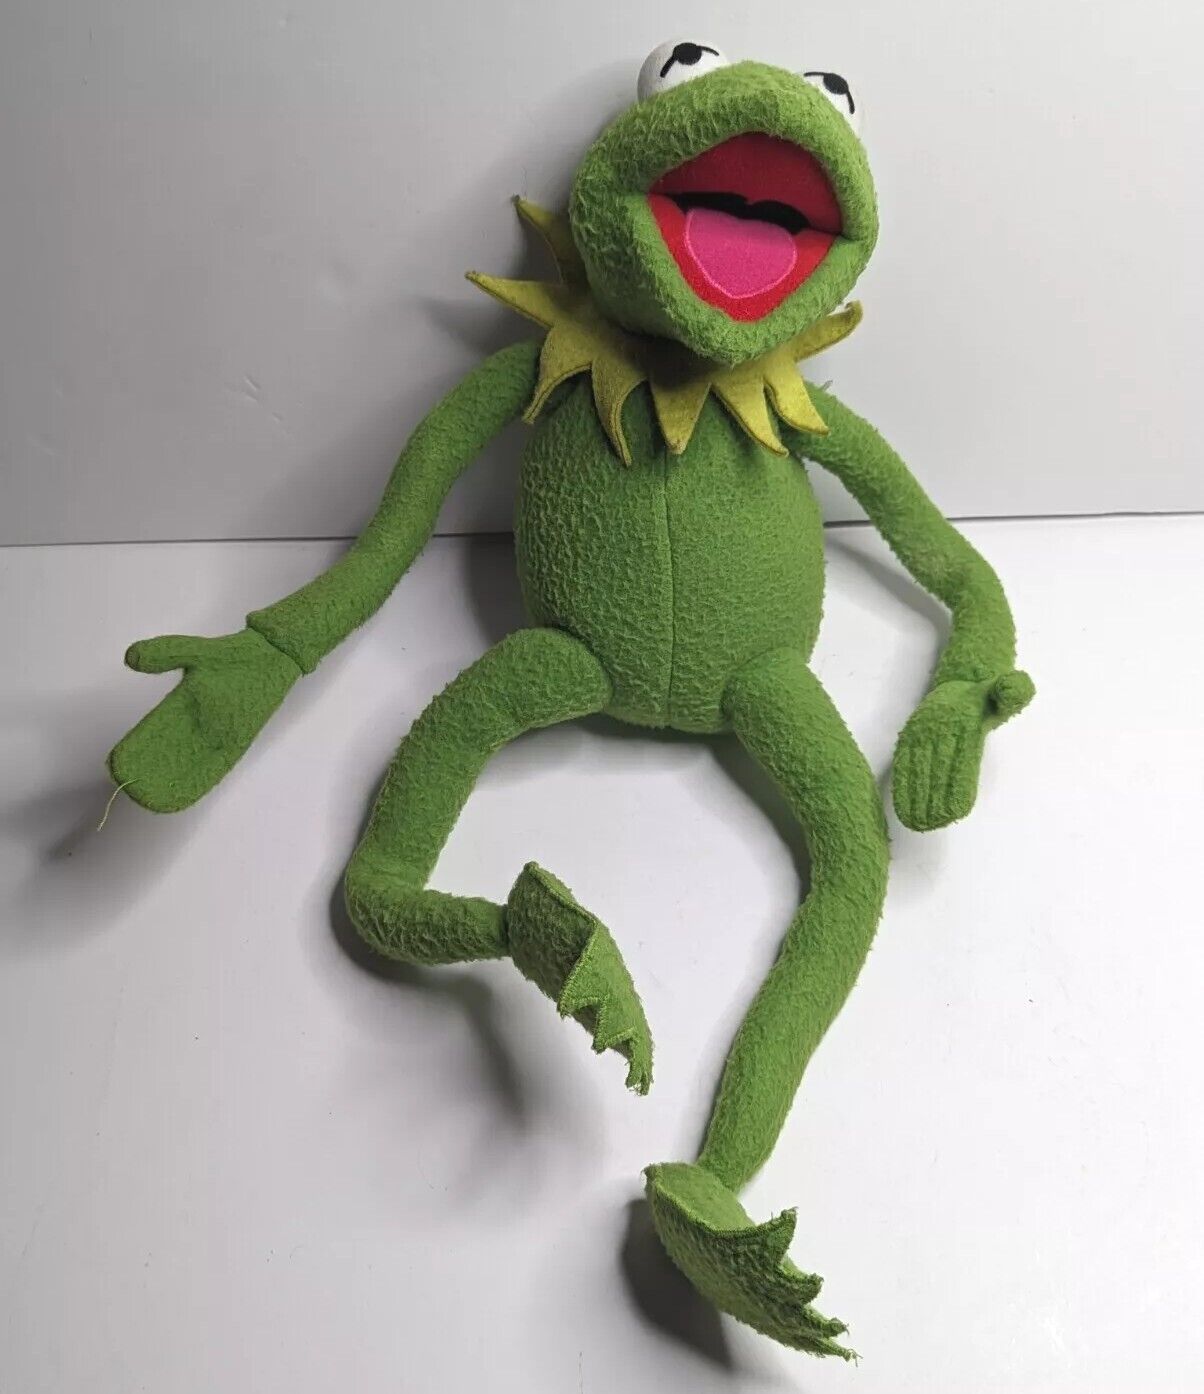 Vintage The Muppets Kermit the Frog Puppet From Eden Toys 24” Plush Stuffed Frog